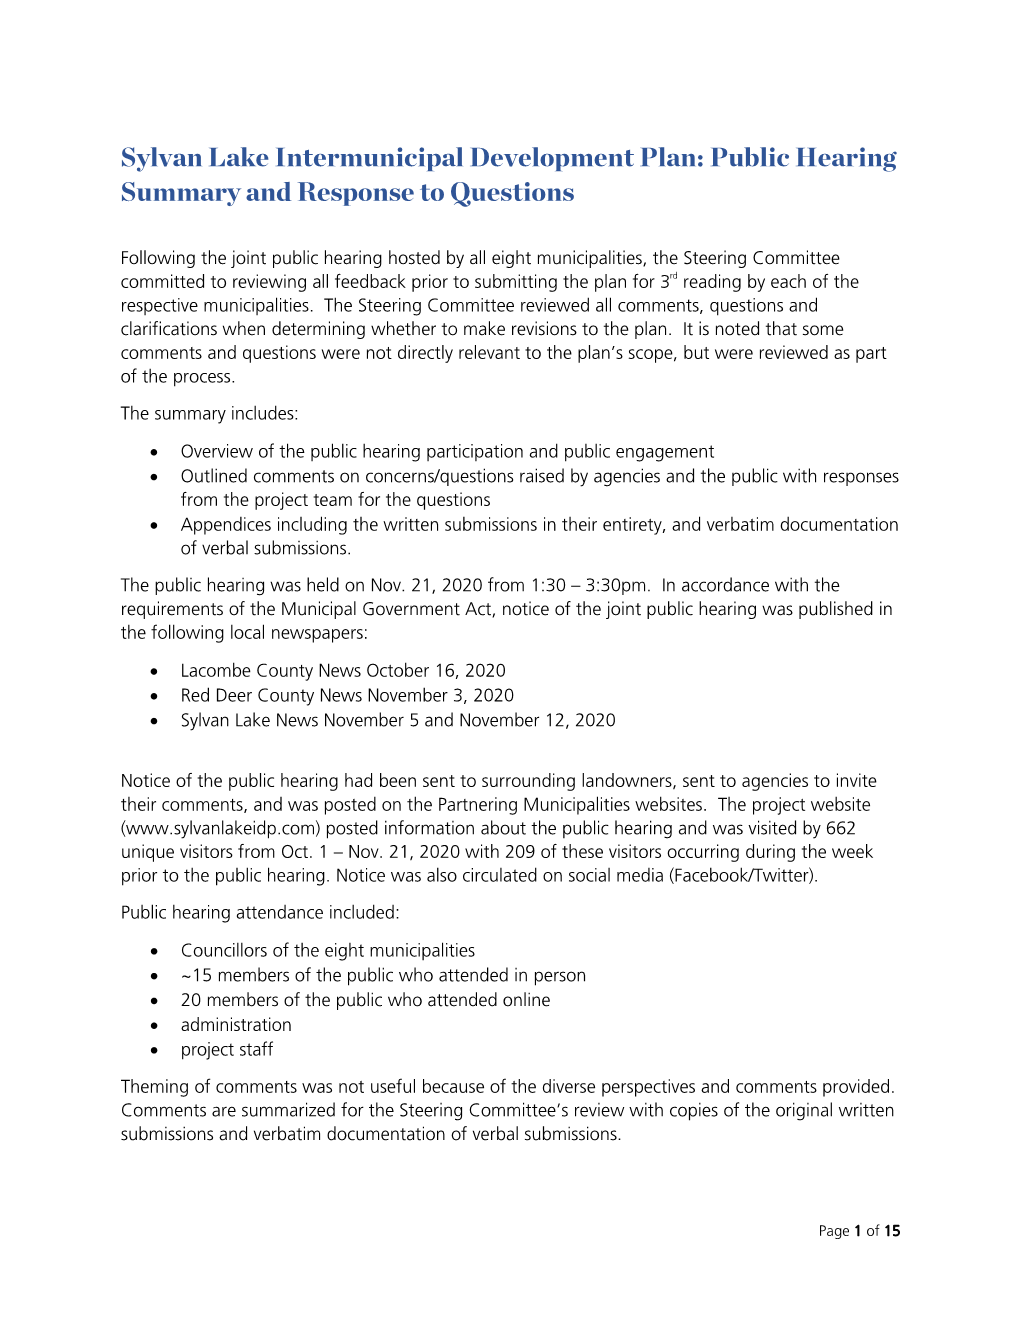 Public Hearing Summary and Response to Questions